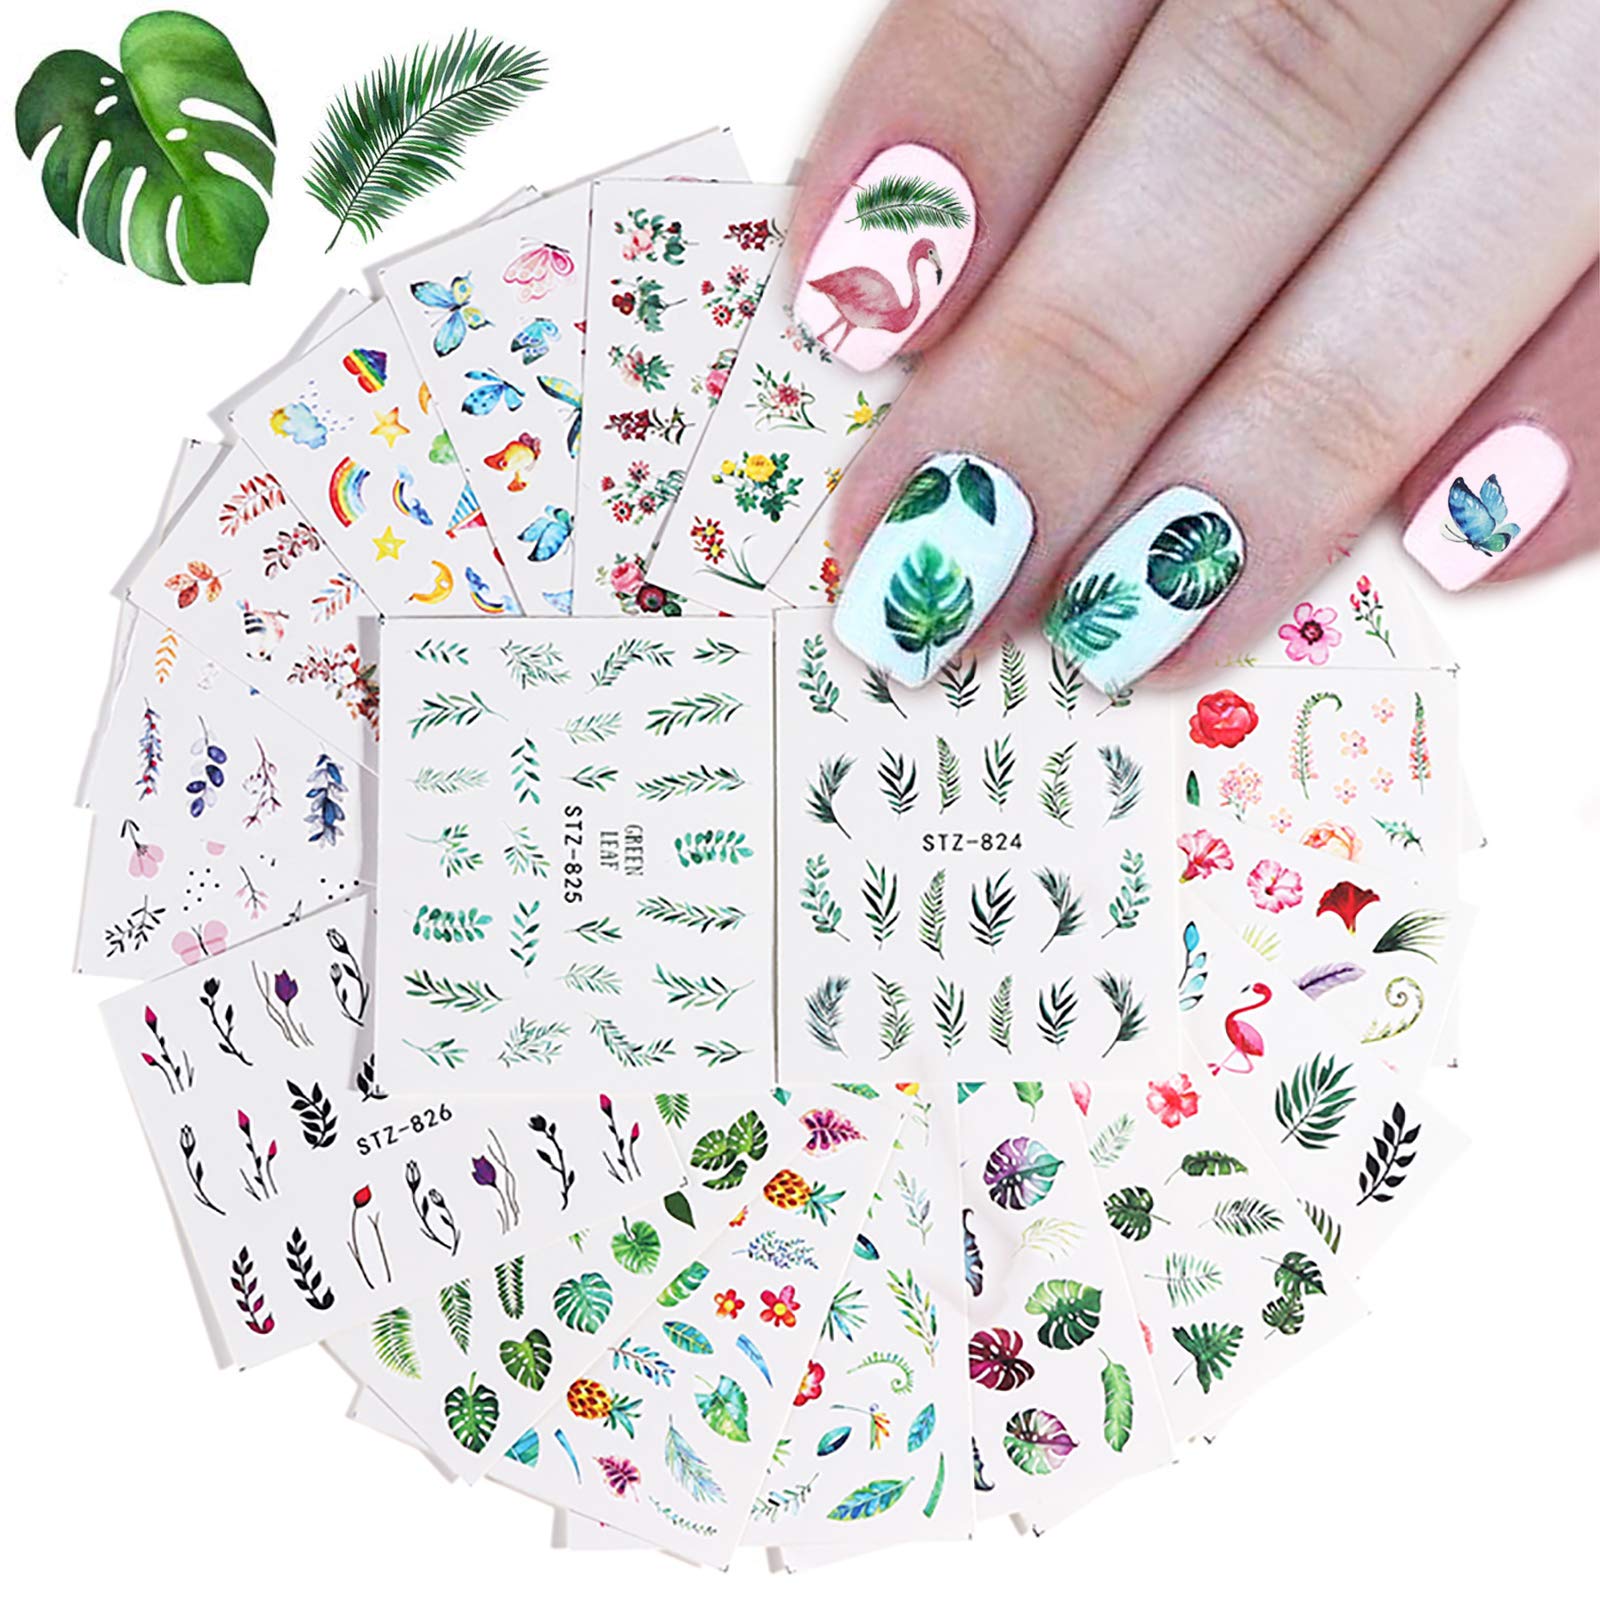 Kalolary 29Pcs Nail Stickers Water Transfer Fresh Nail Decals for ...